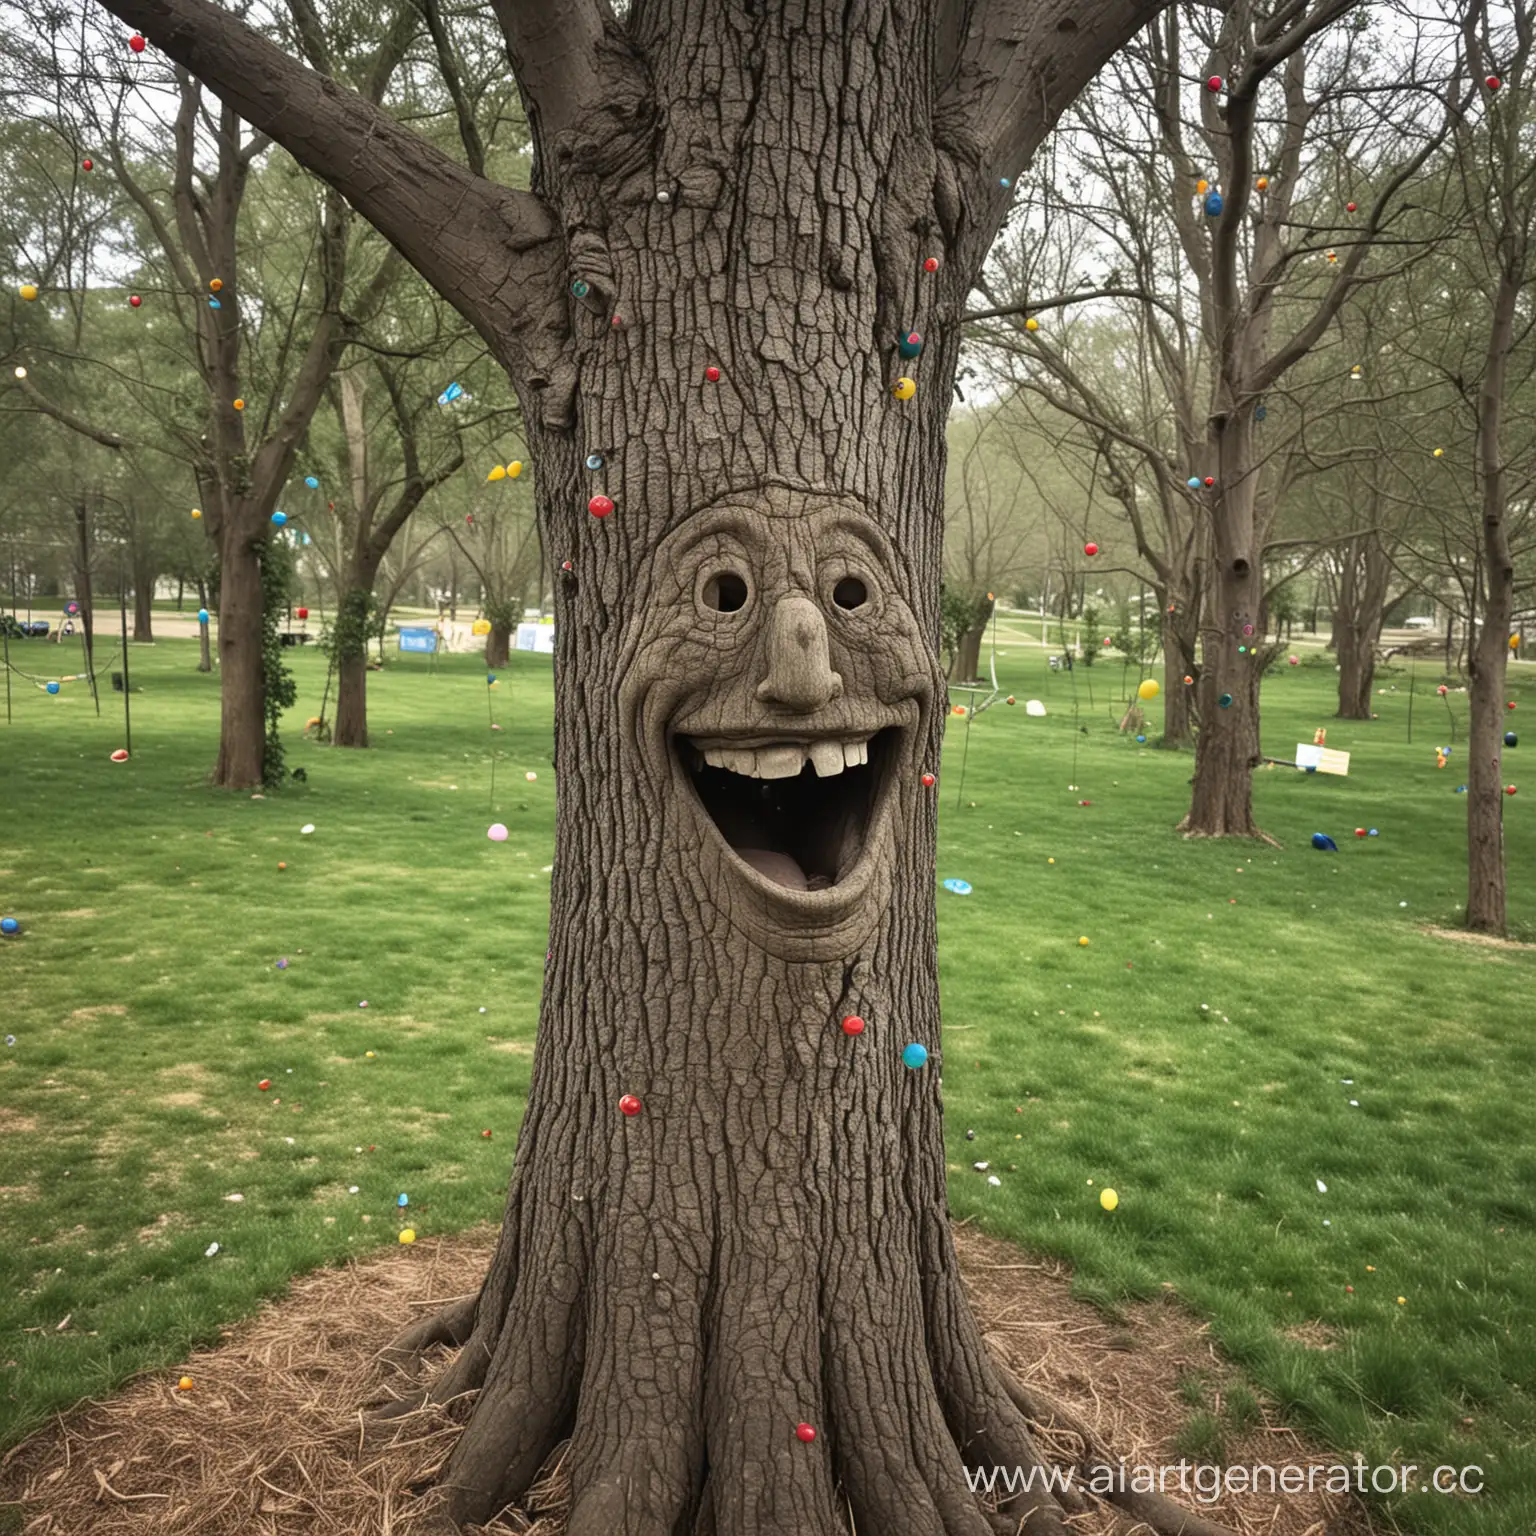 Joyful-Celebration-The-Tree-Laughs-at-the-Party